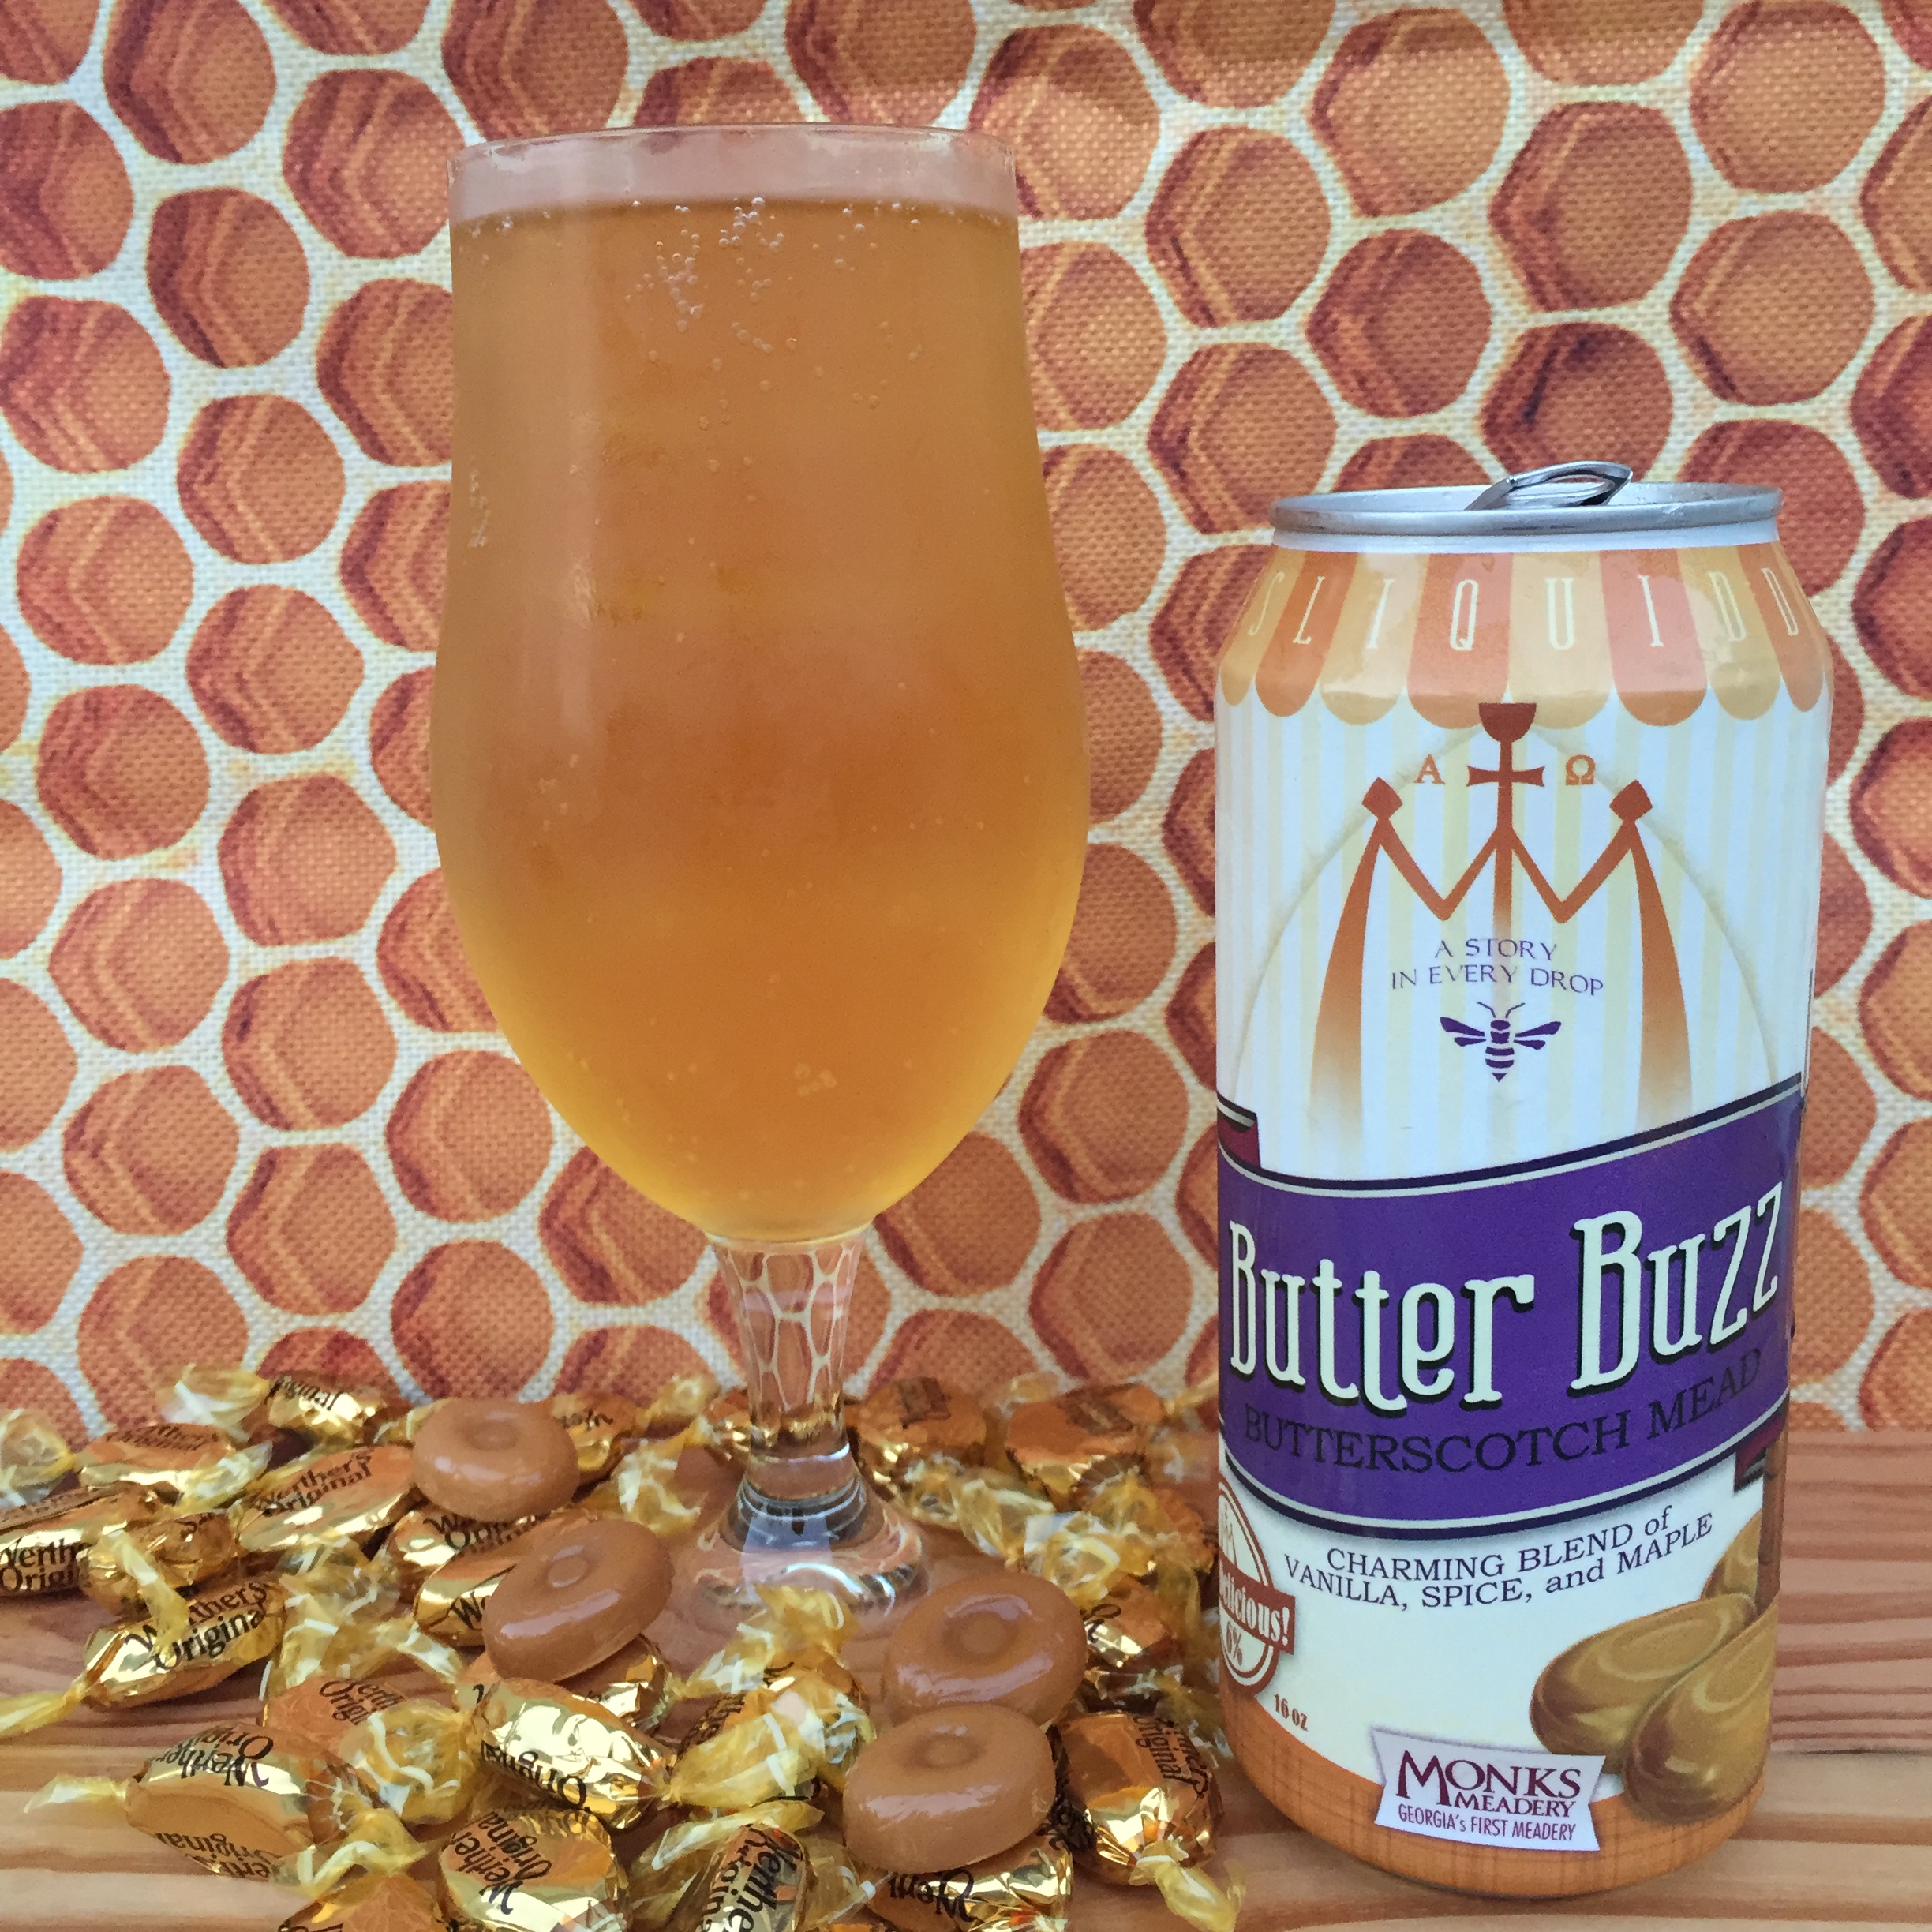 Butter Buzz Mead from Monk's Meadery